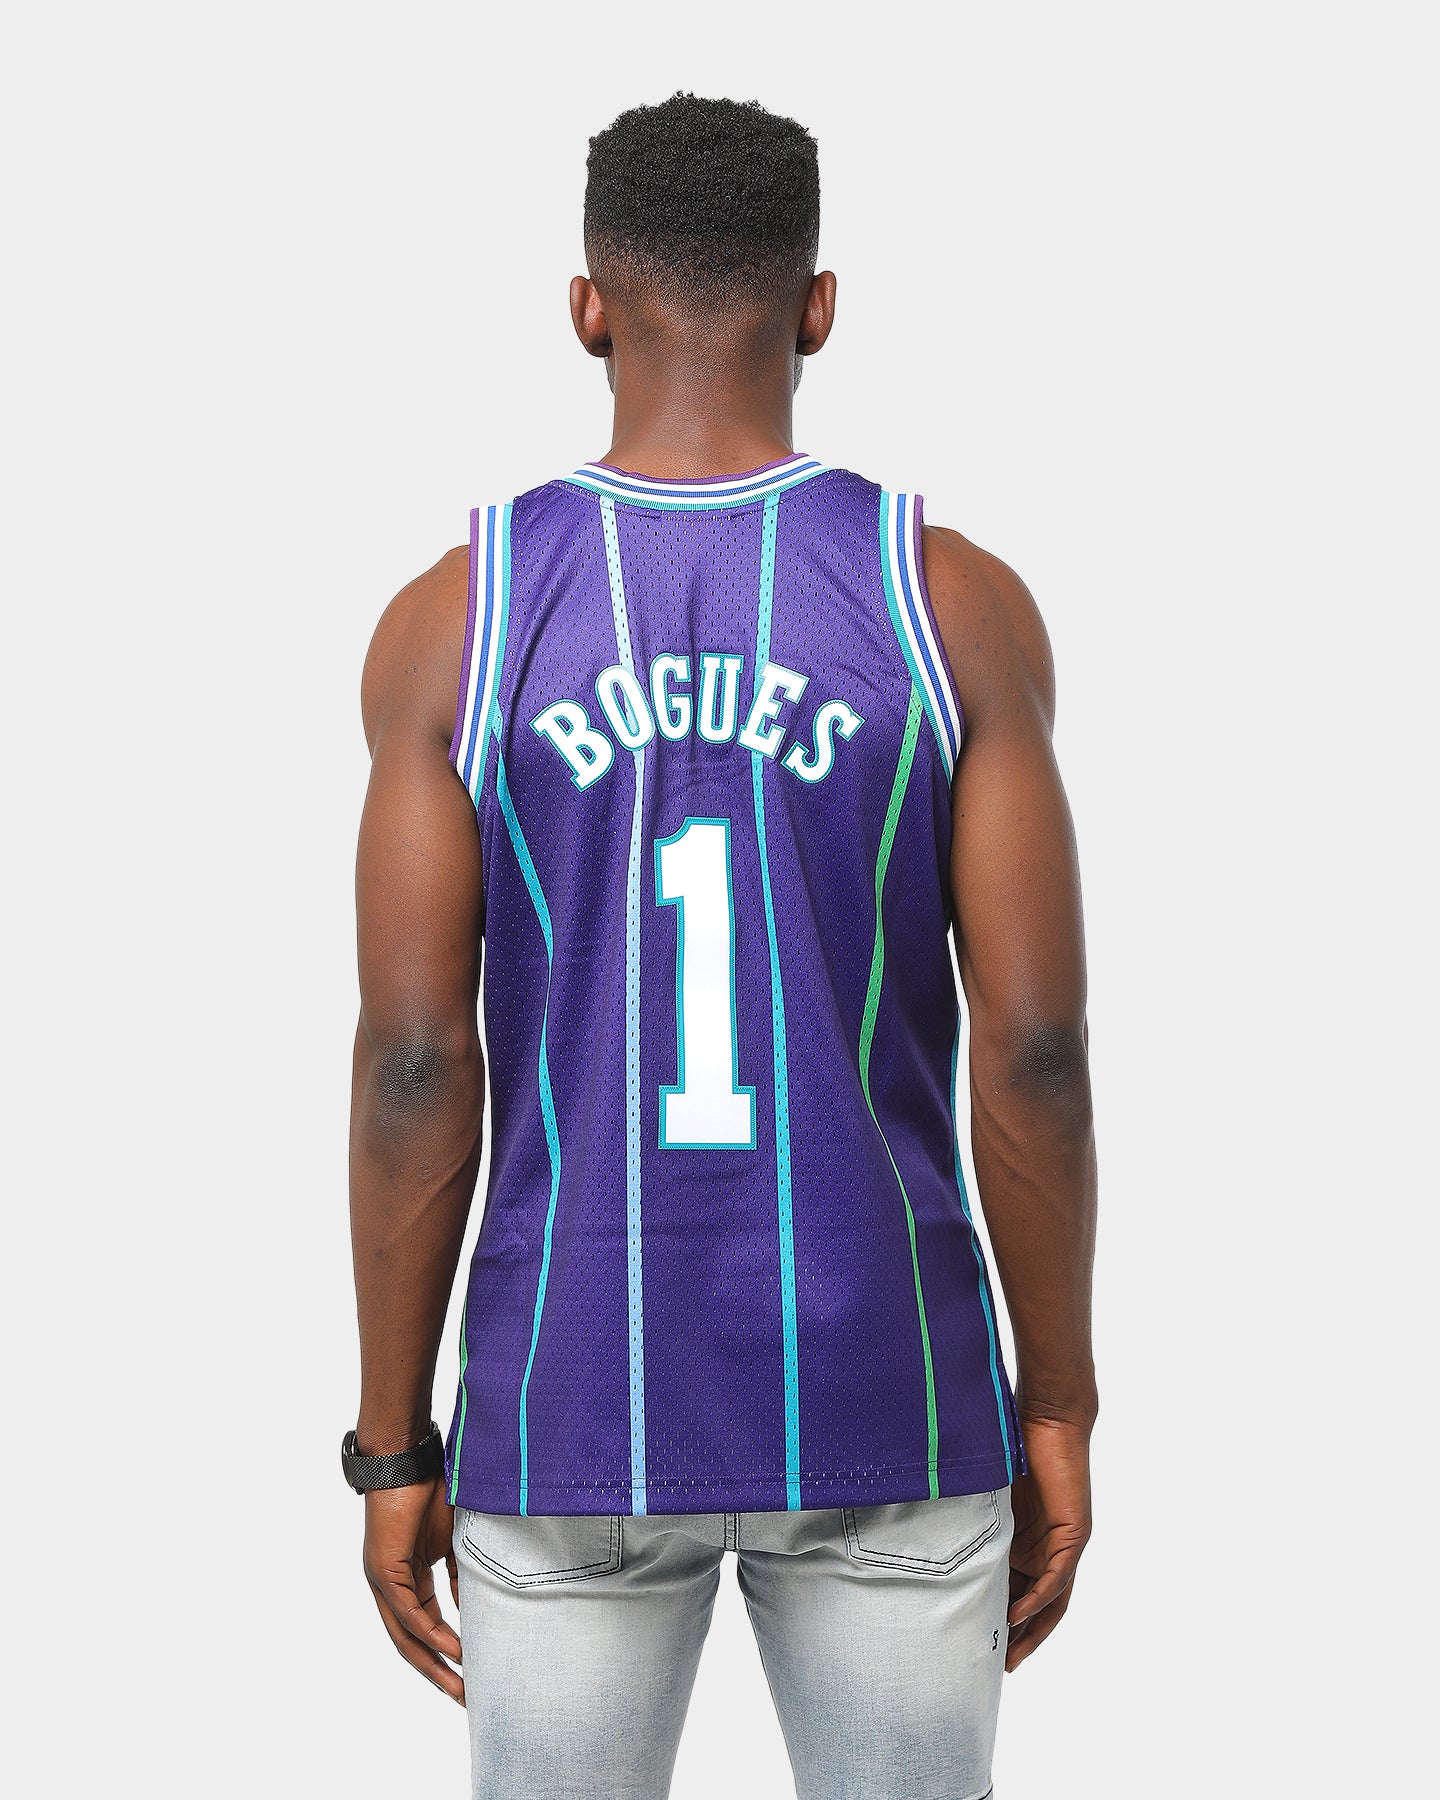 muggsy bogues jersey youth